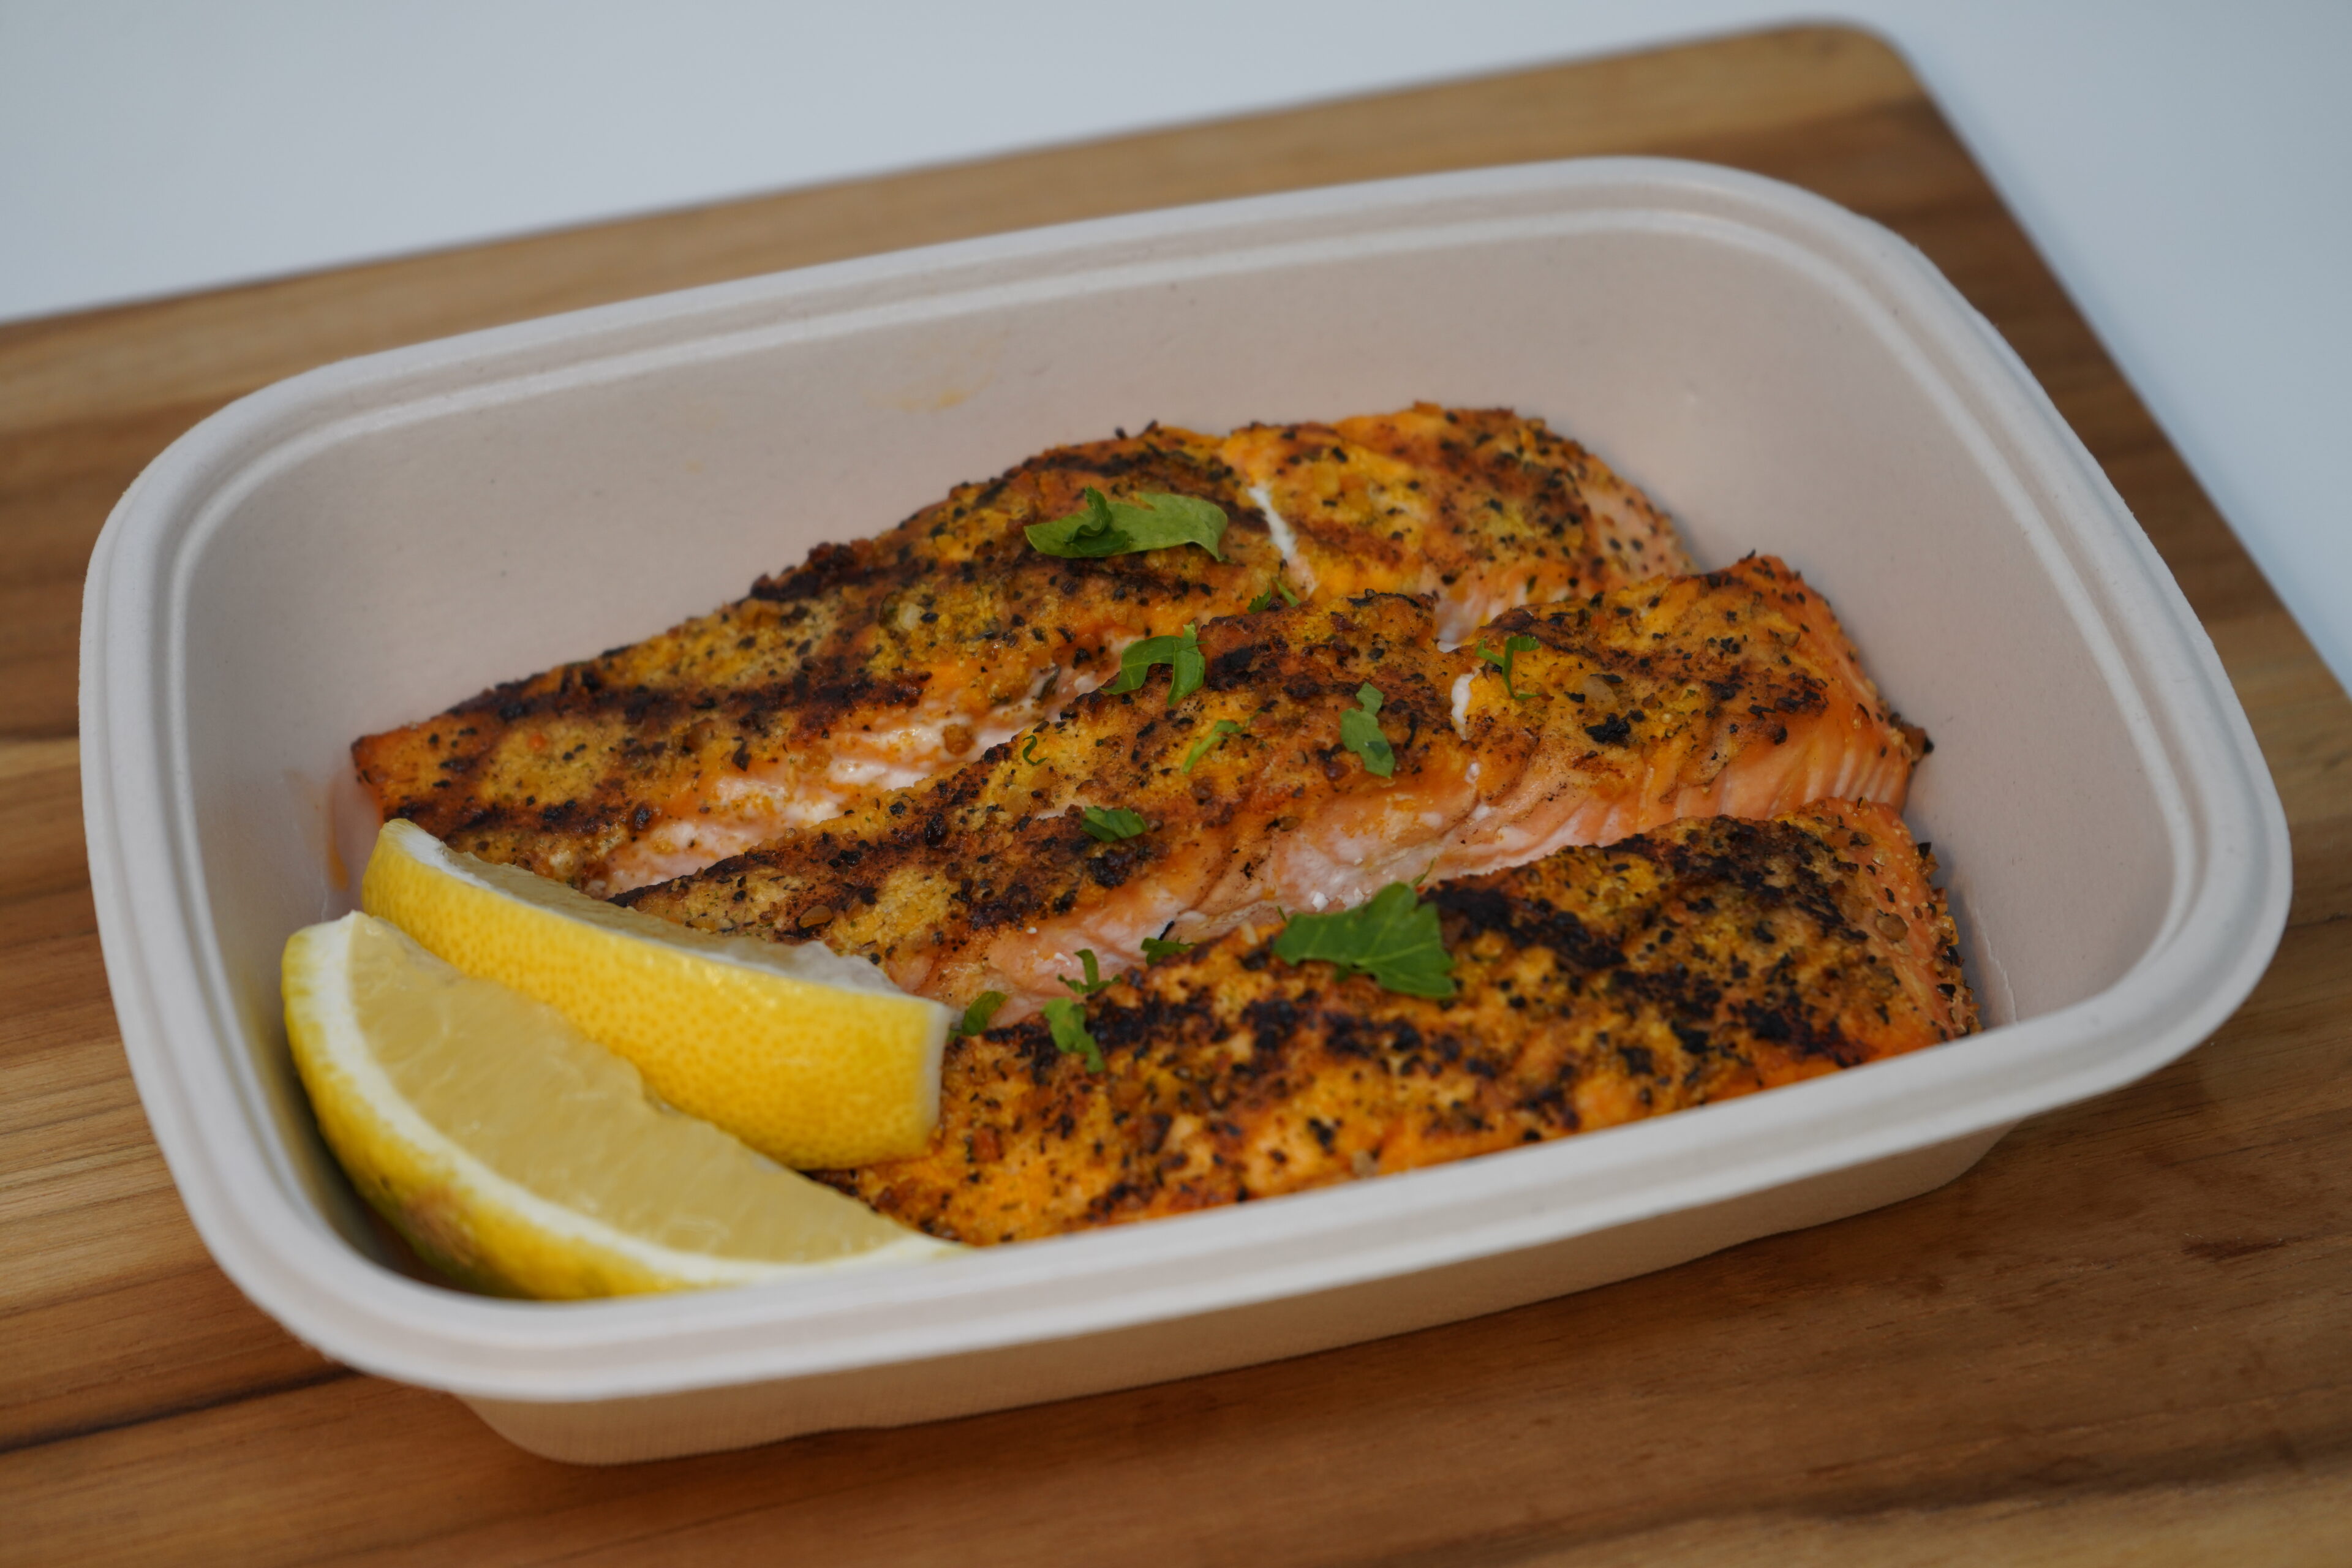 By The Pound - Herb Seared Salmon